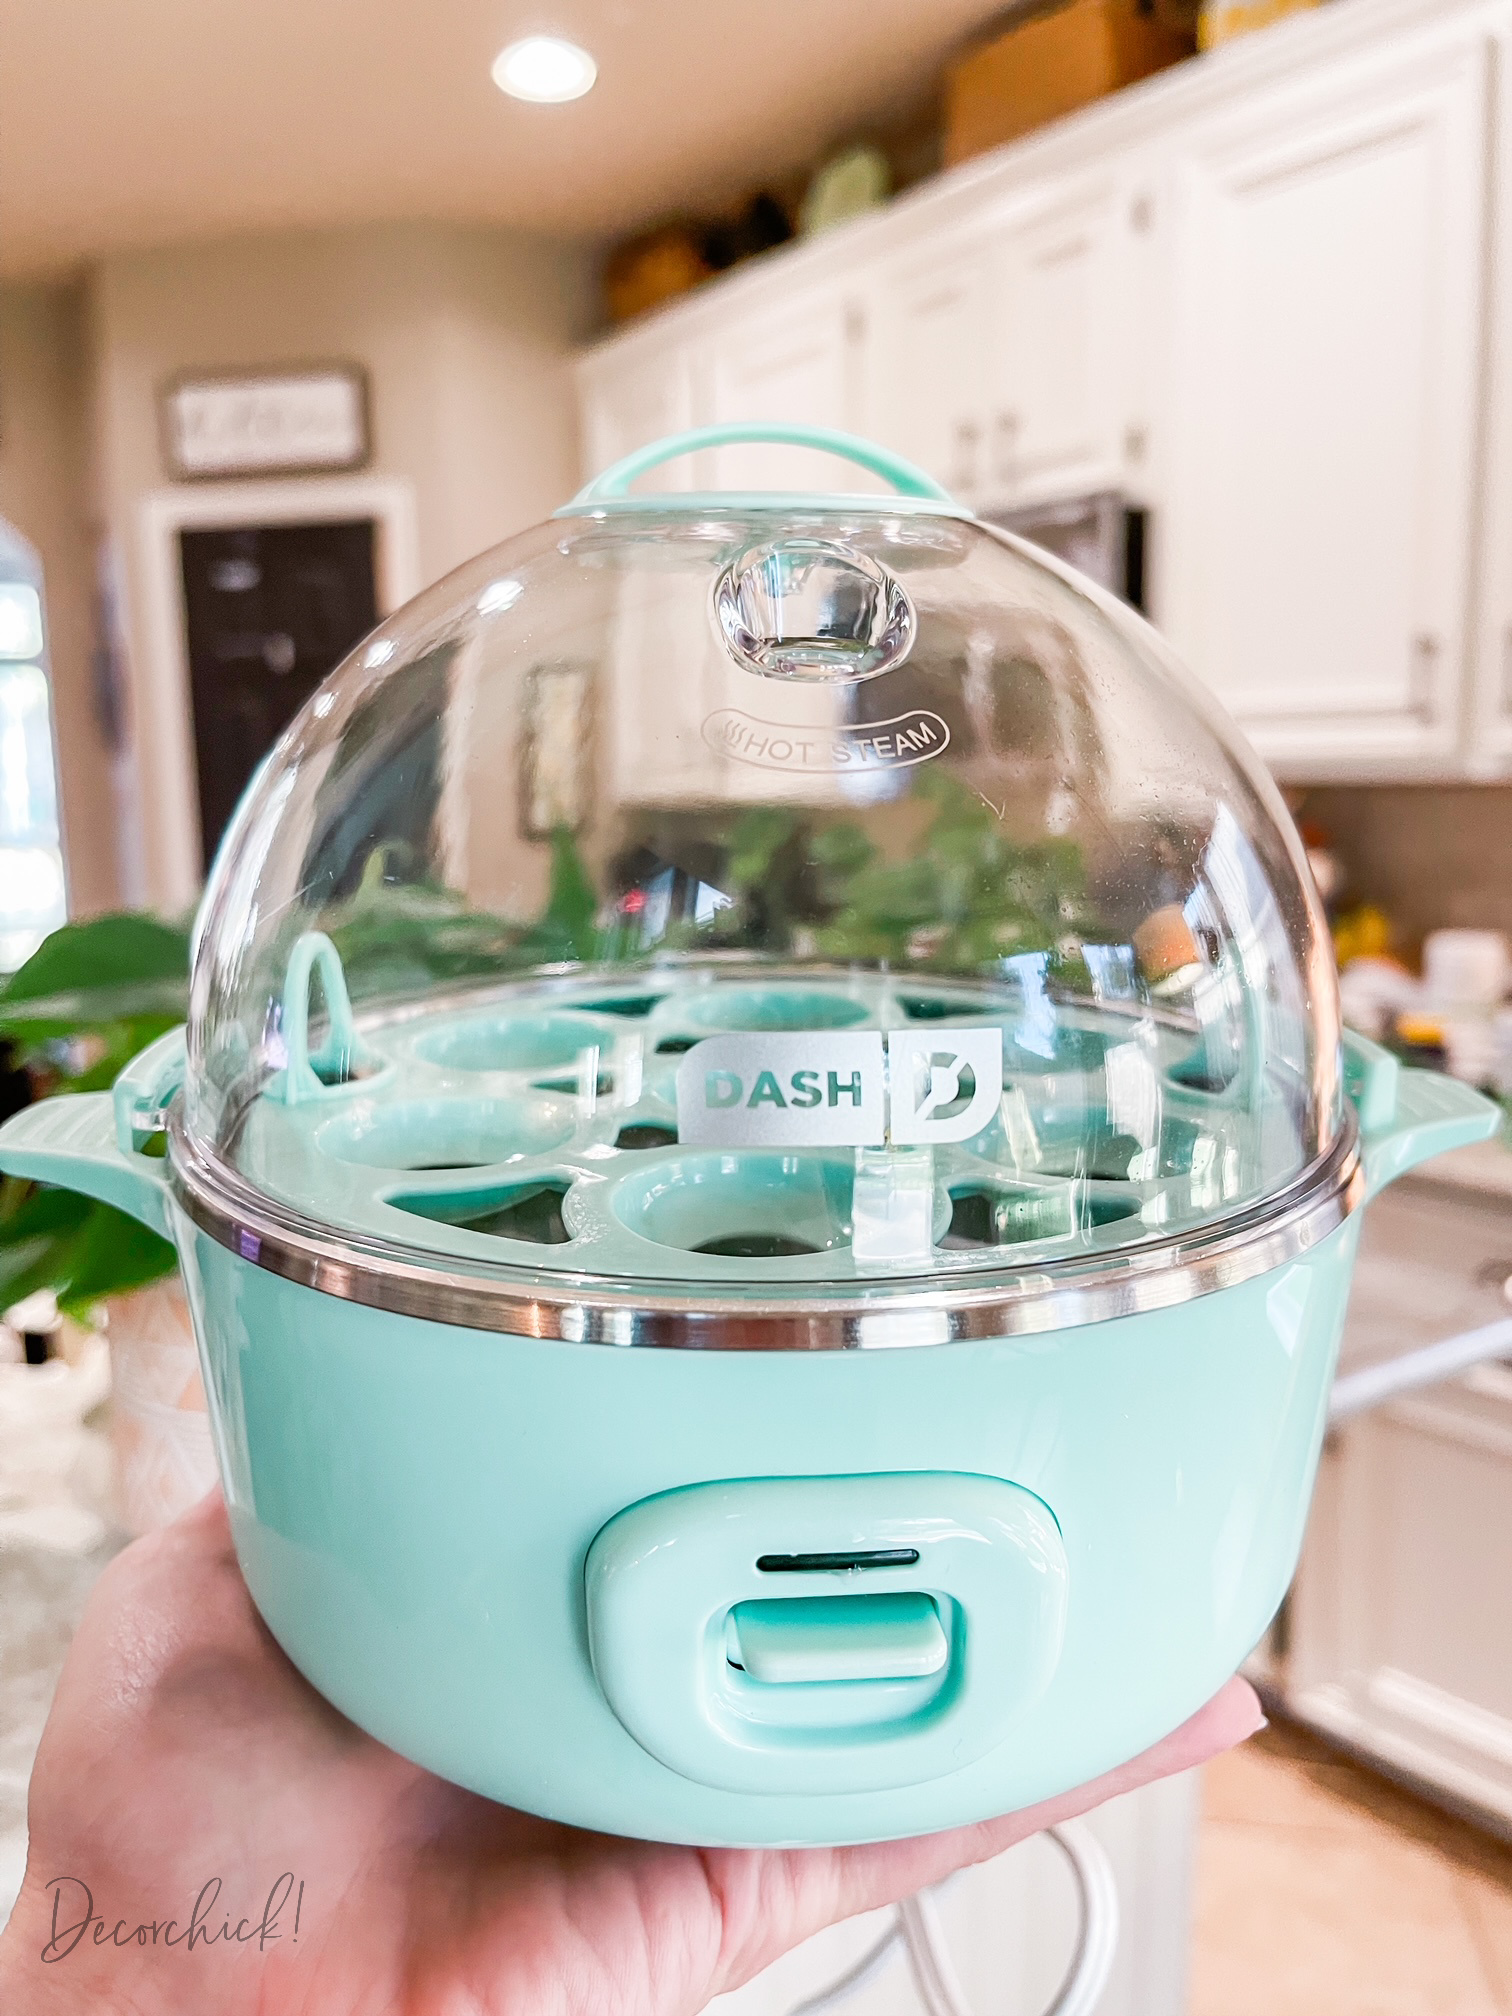 The Dash Rapid Egg Cooker Is $20 at